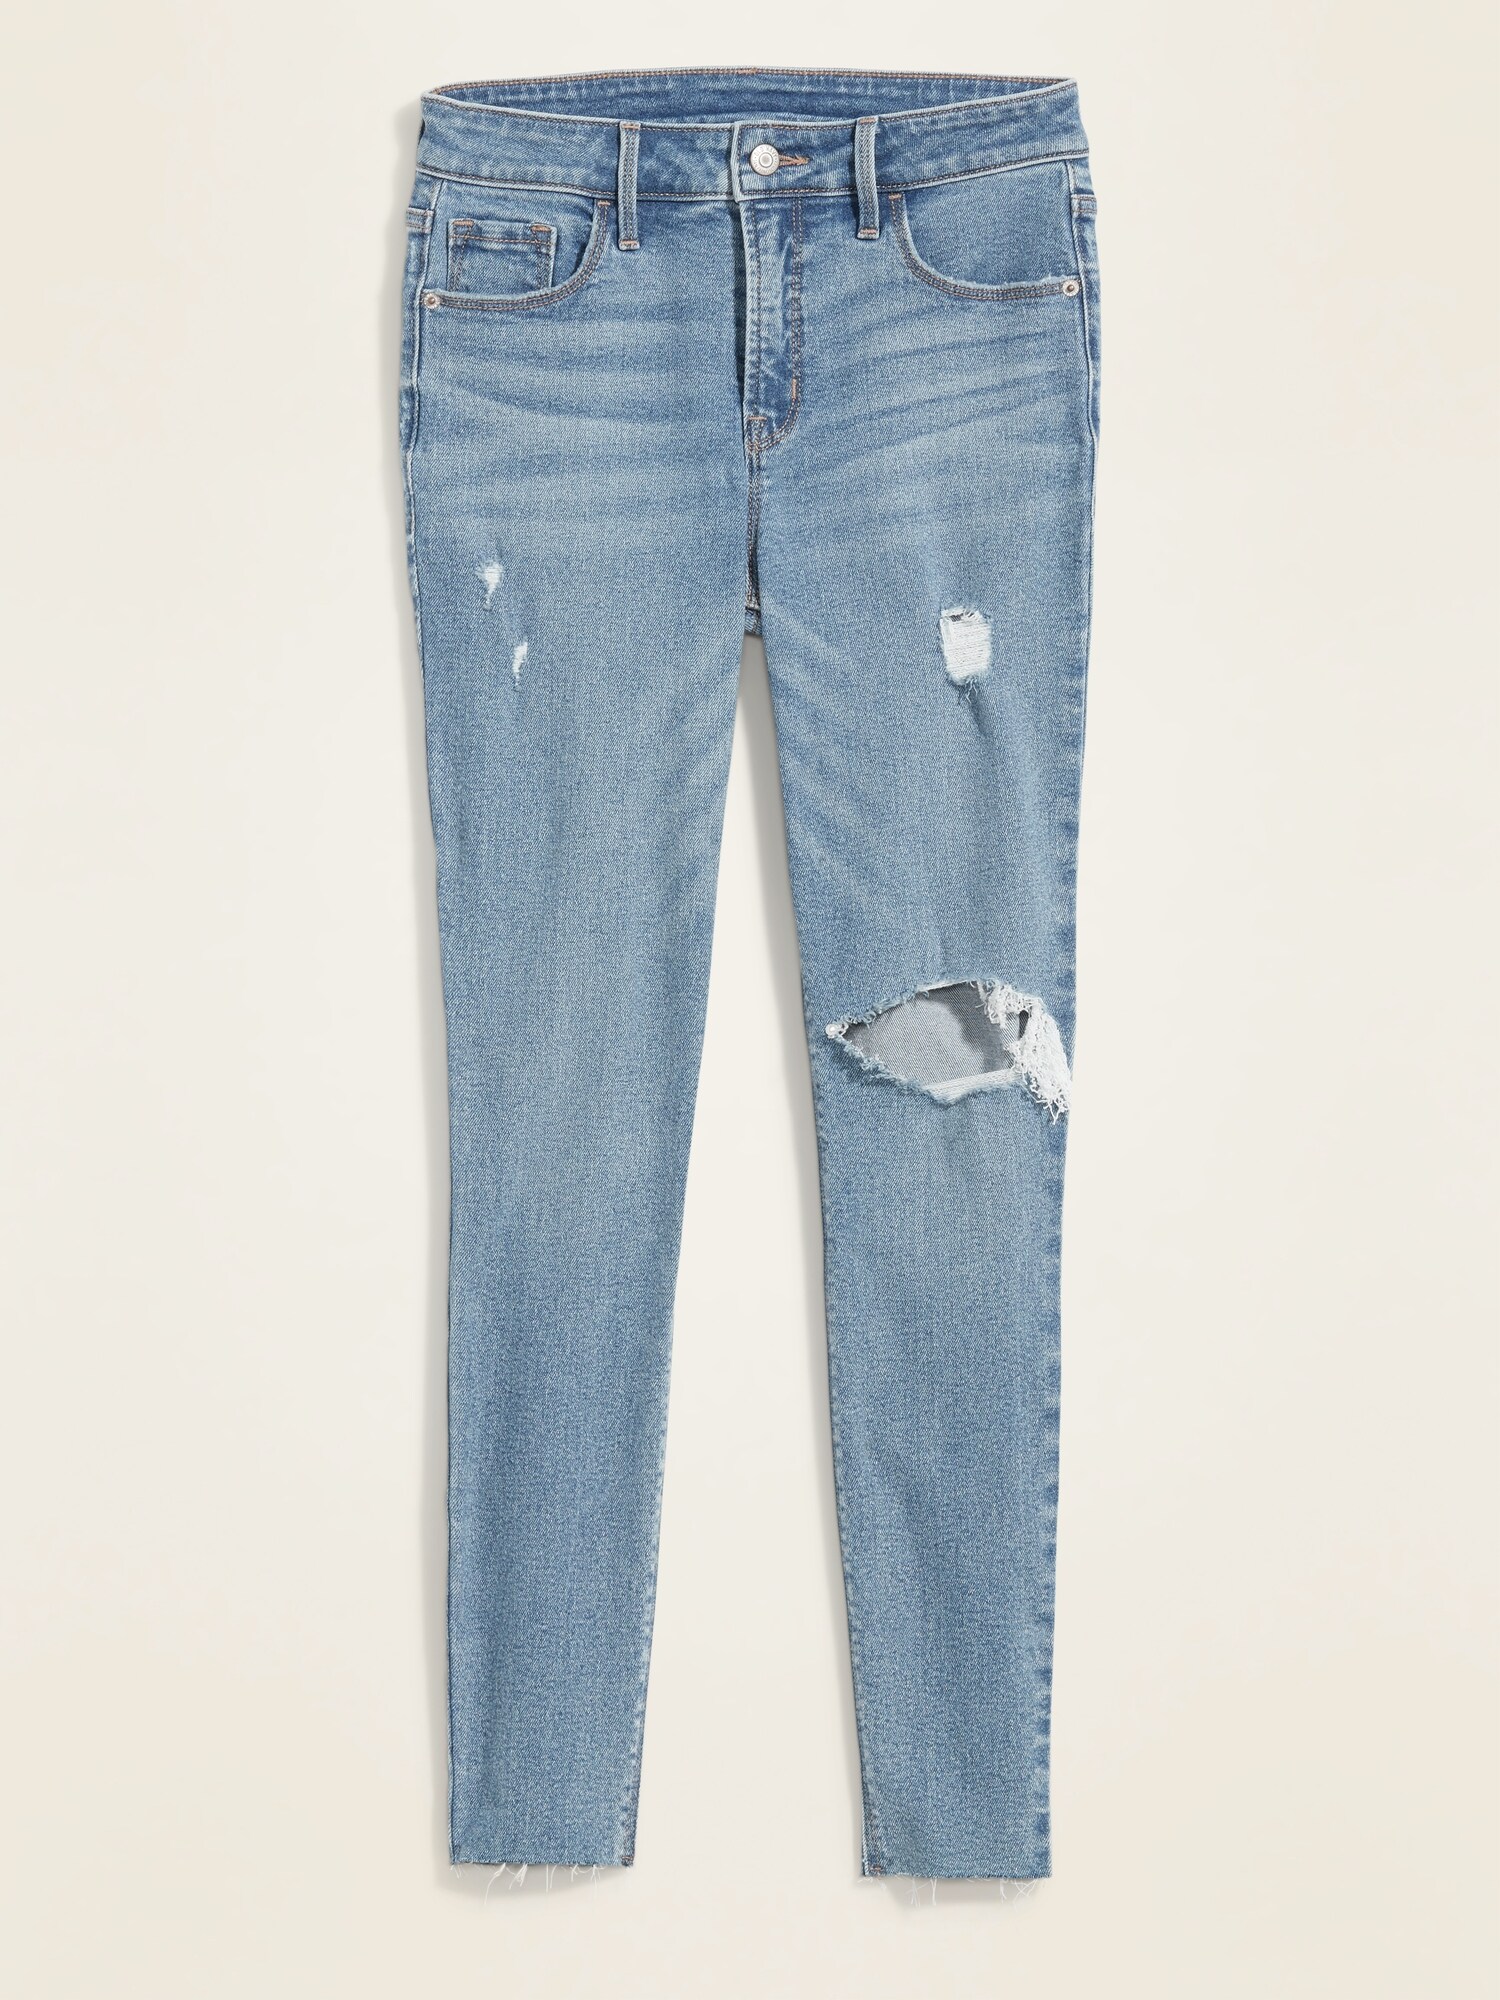 High Waisted Rockstar Super Skinny Ripped Ankle Jeans For Women Old Navy